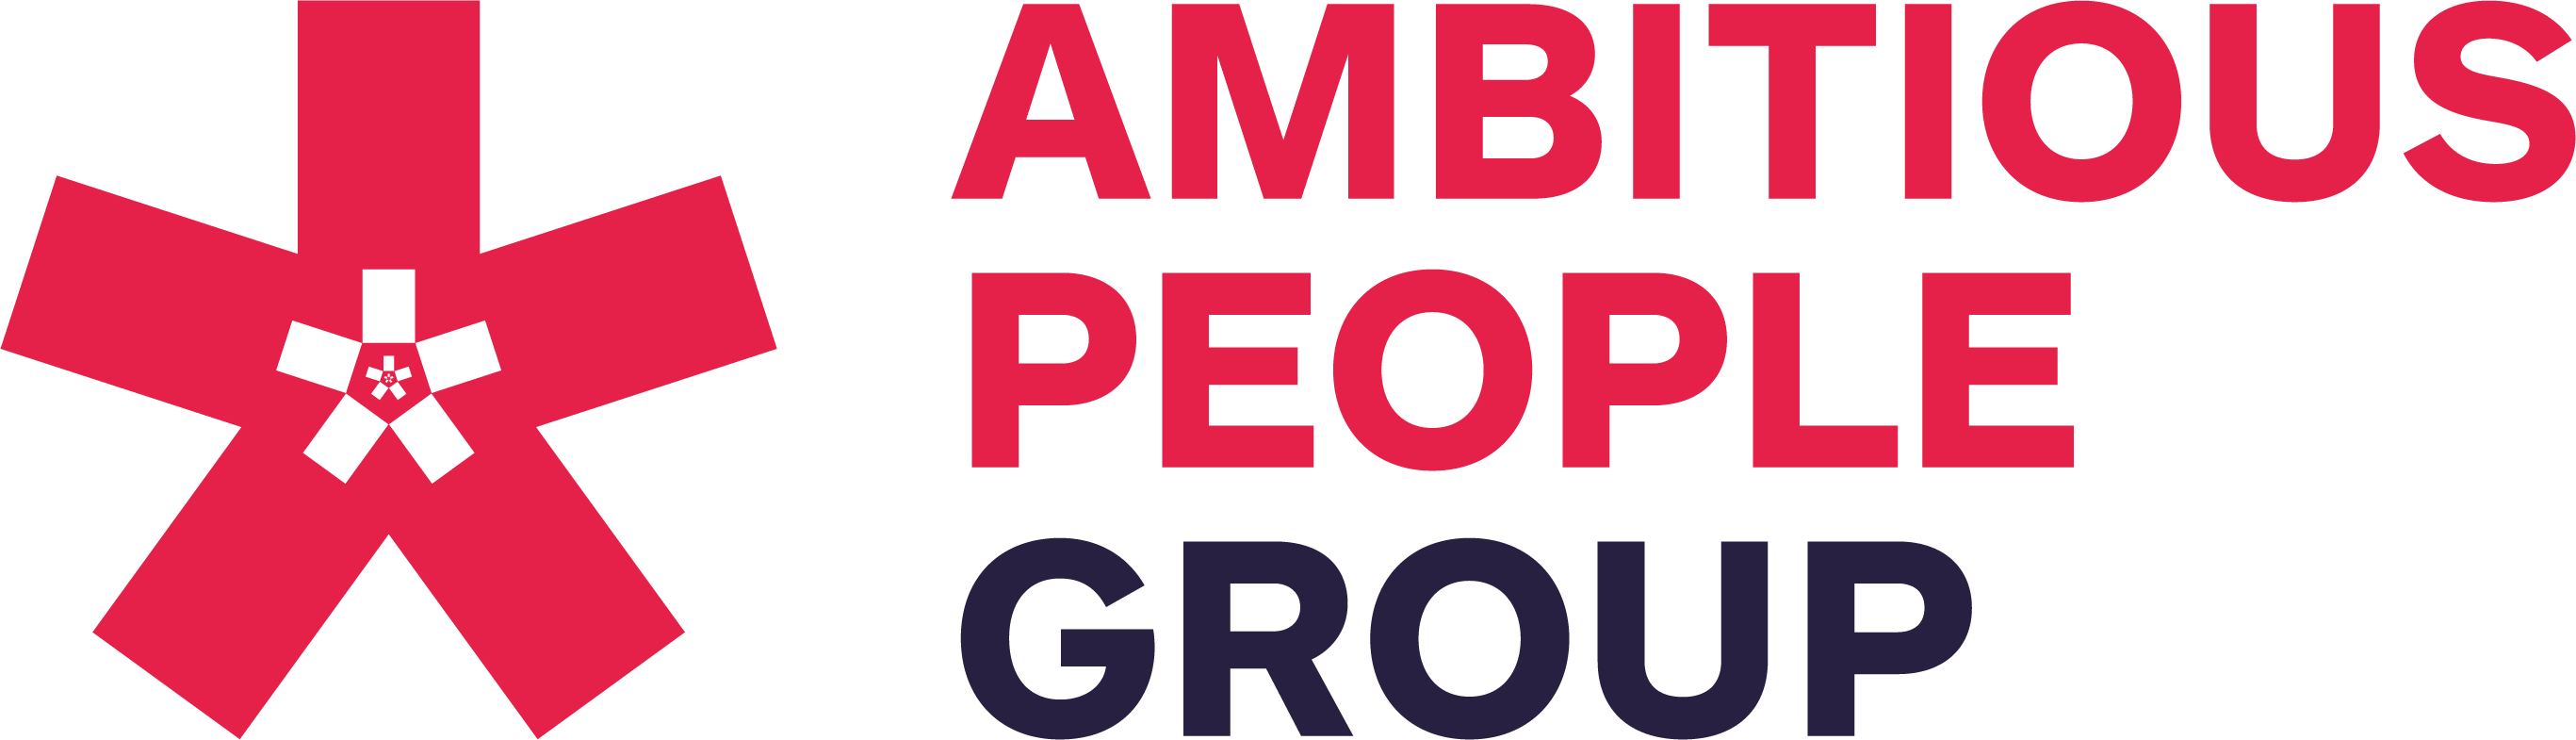 Ambitious People Group Logo PNG